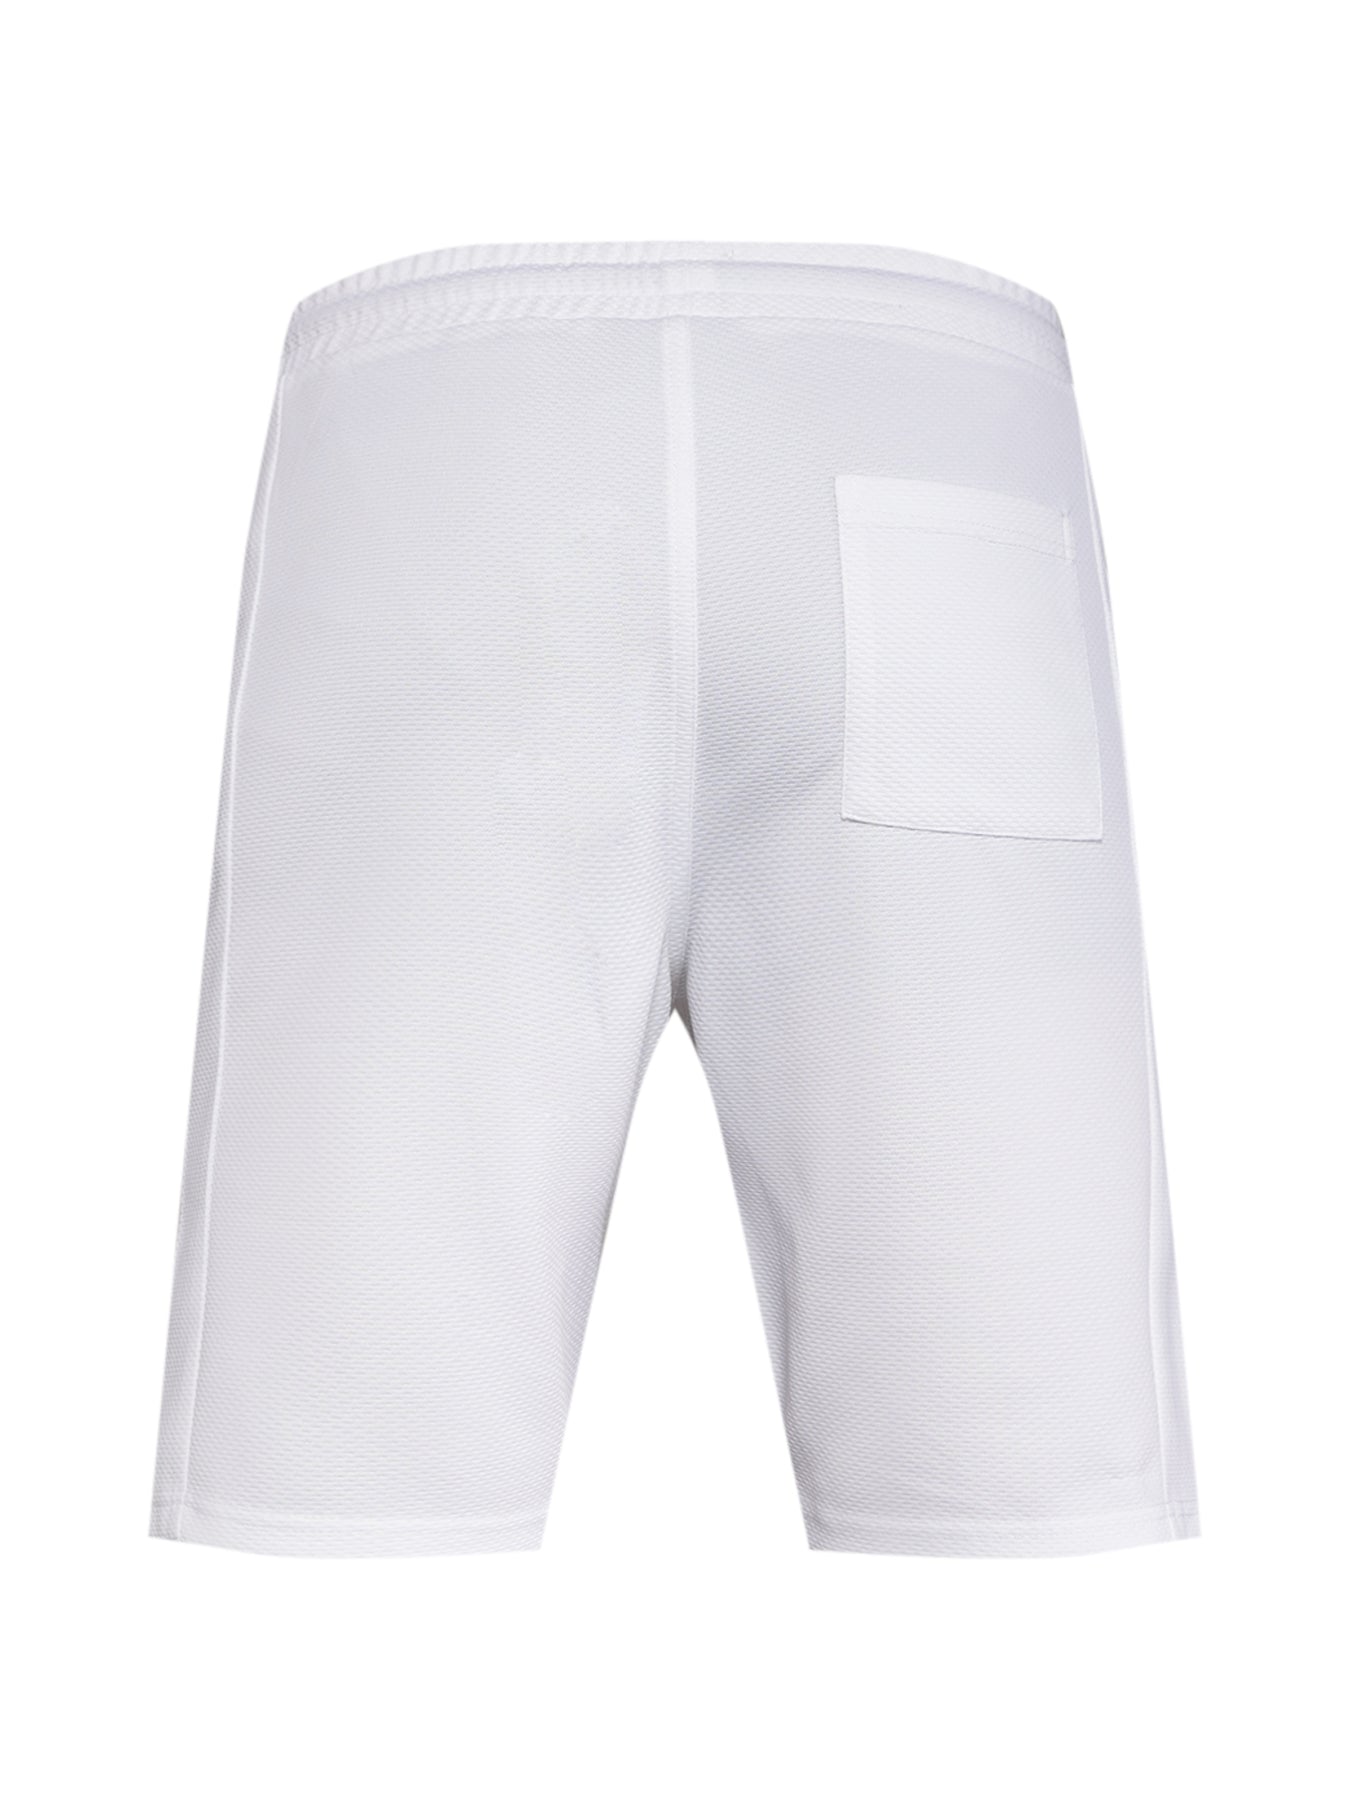 Perforated Shorts